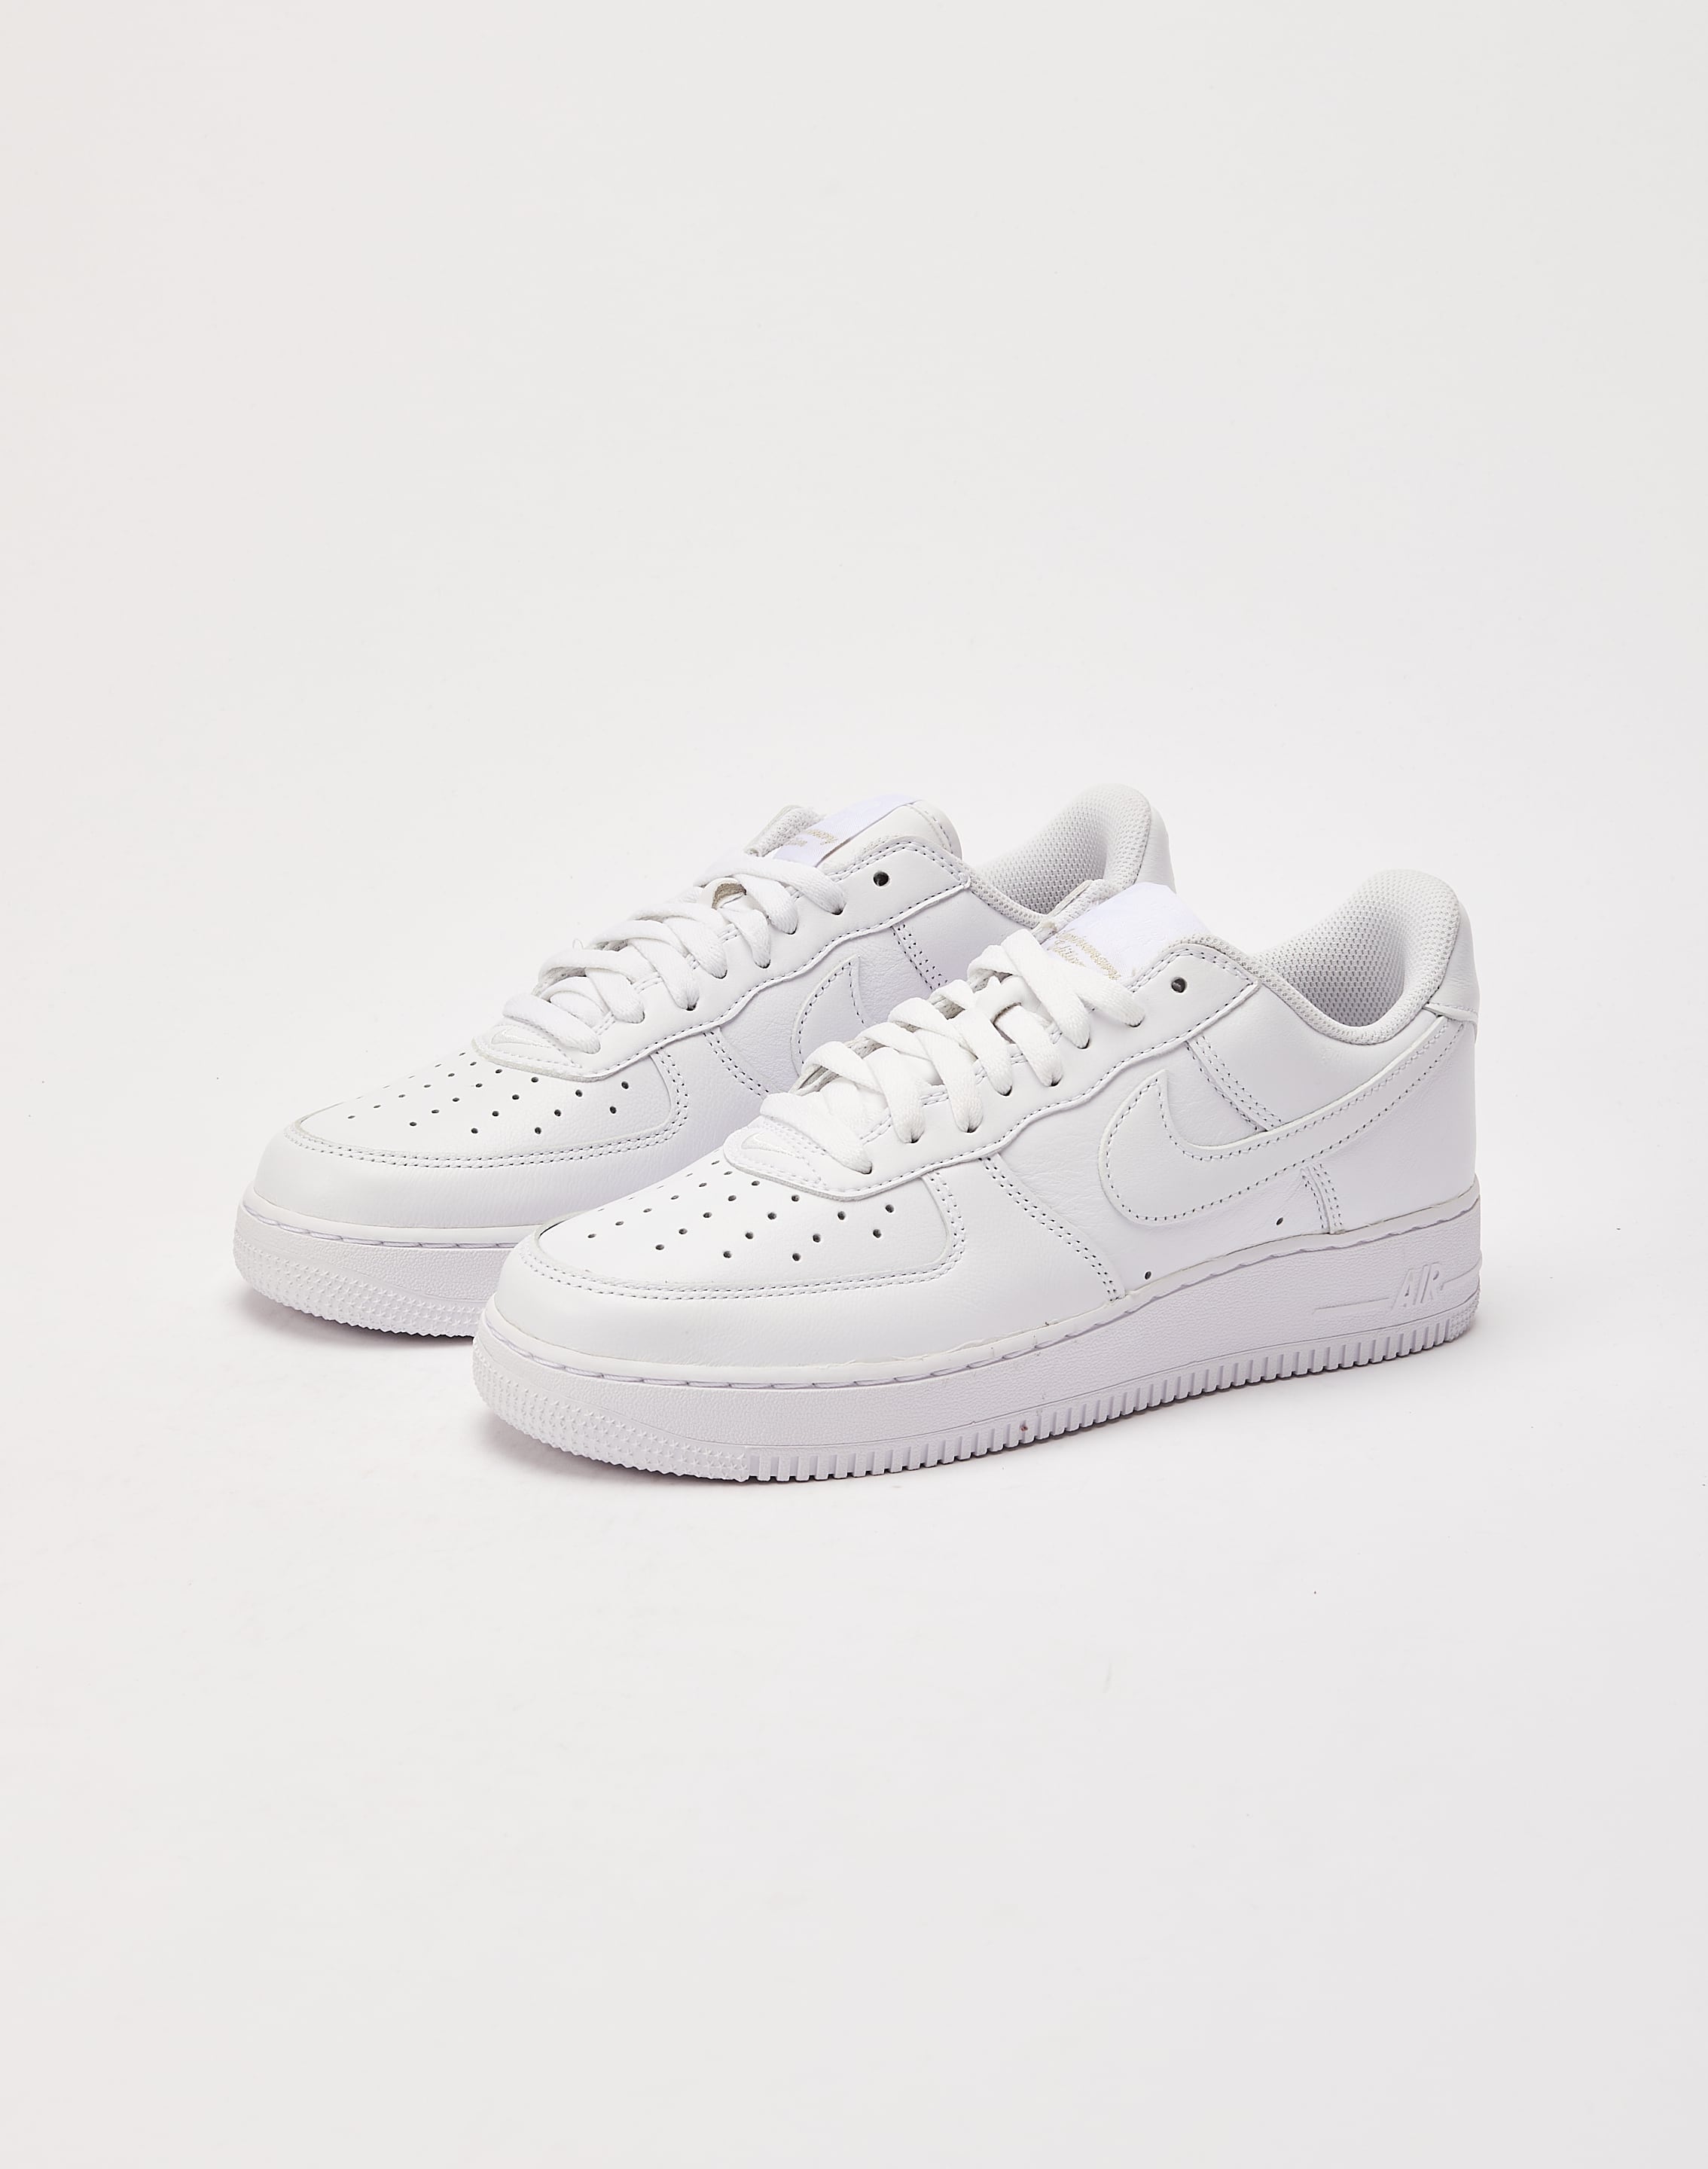 Nike Air Force 1 Low '40th Anniversary' – DTLR